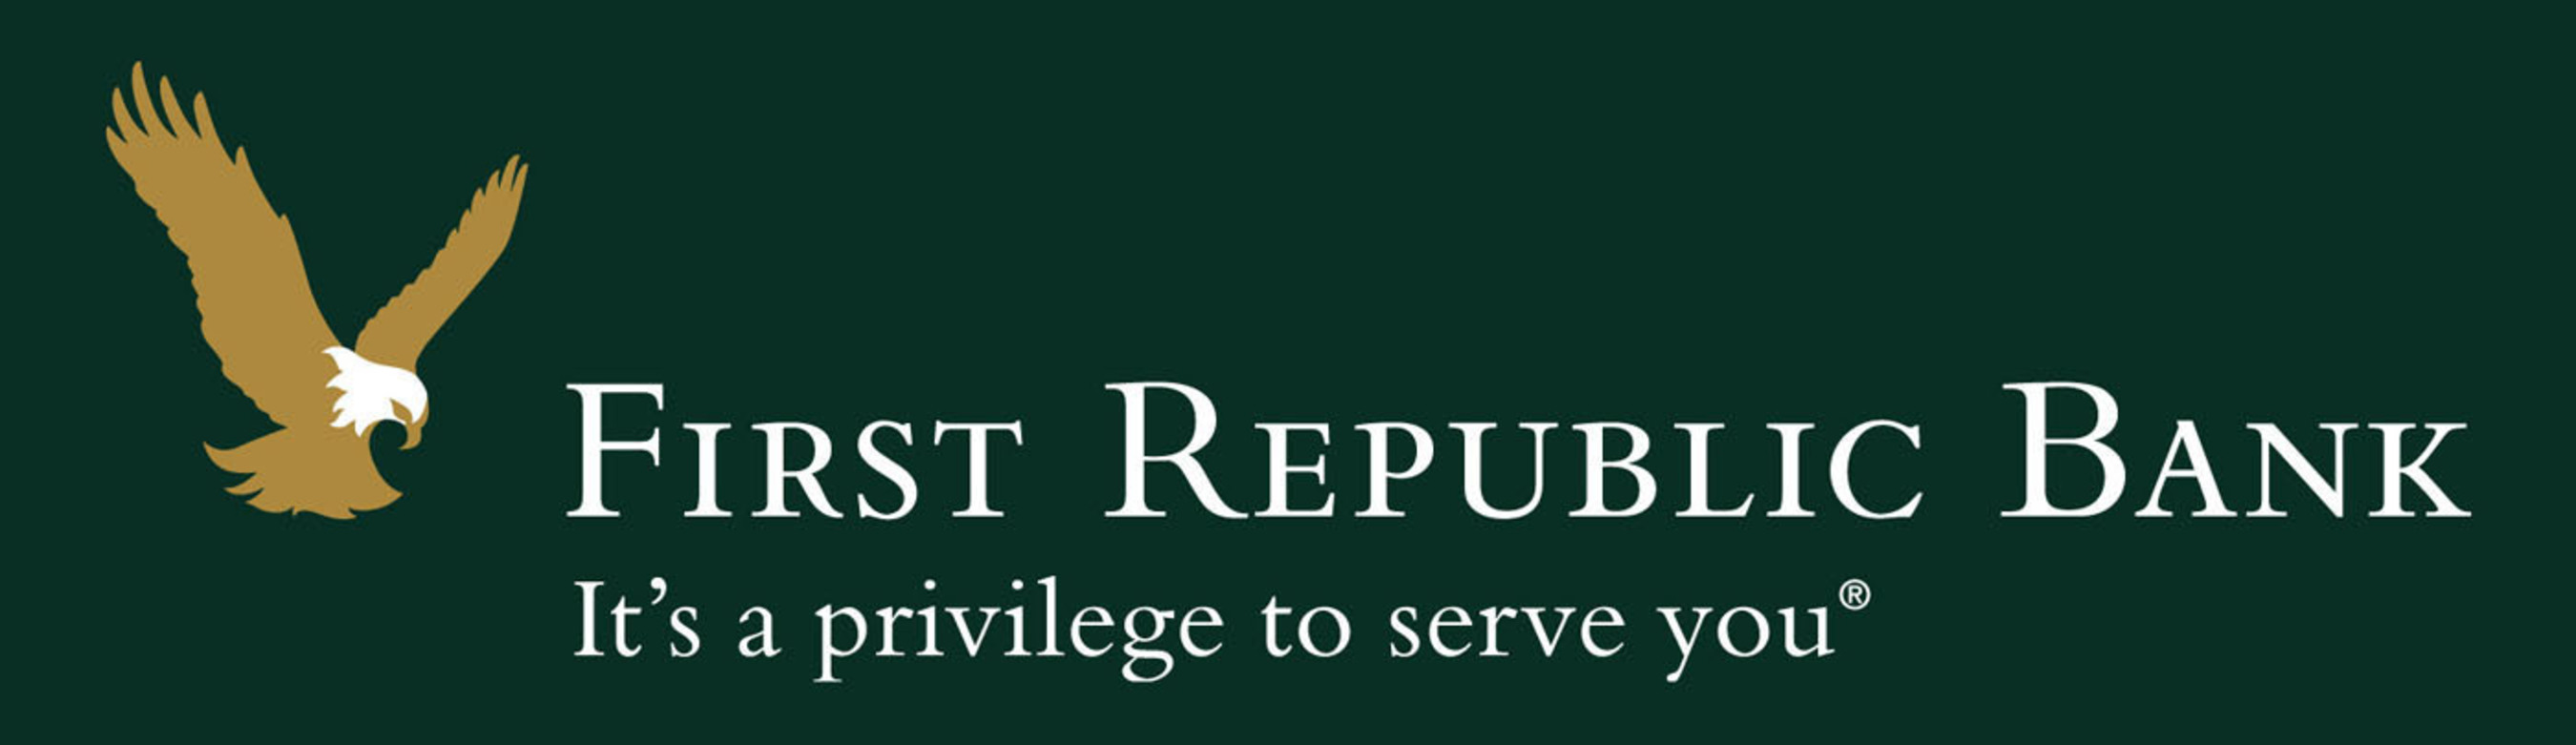 First Republic Bank To Present At The Goldman Sachs U.S. Financial